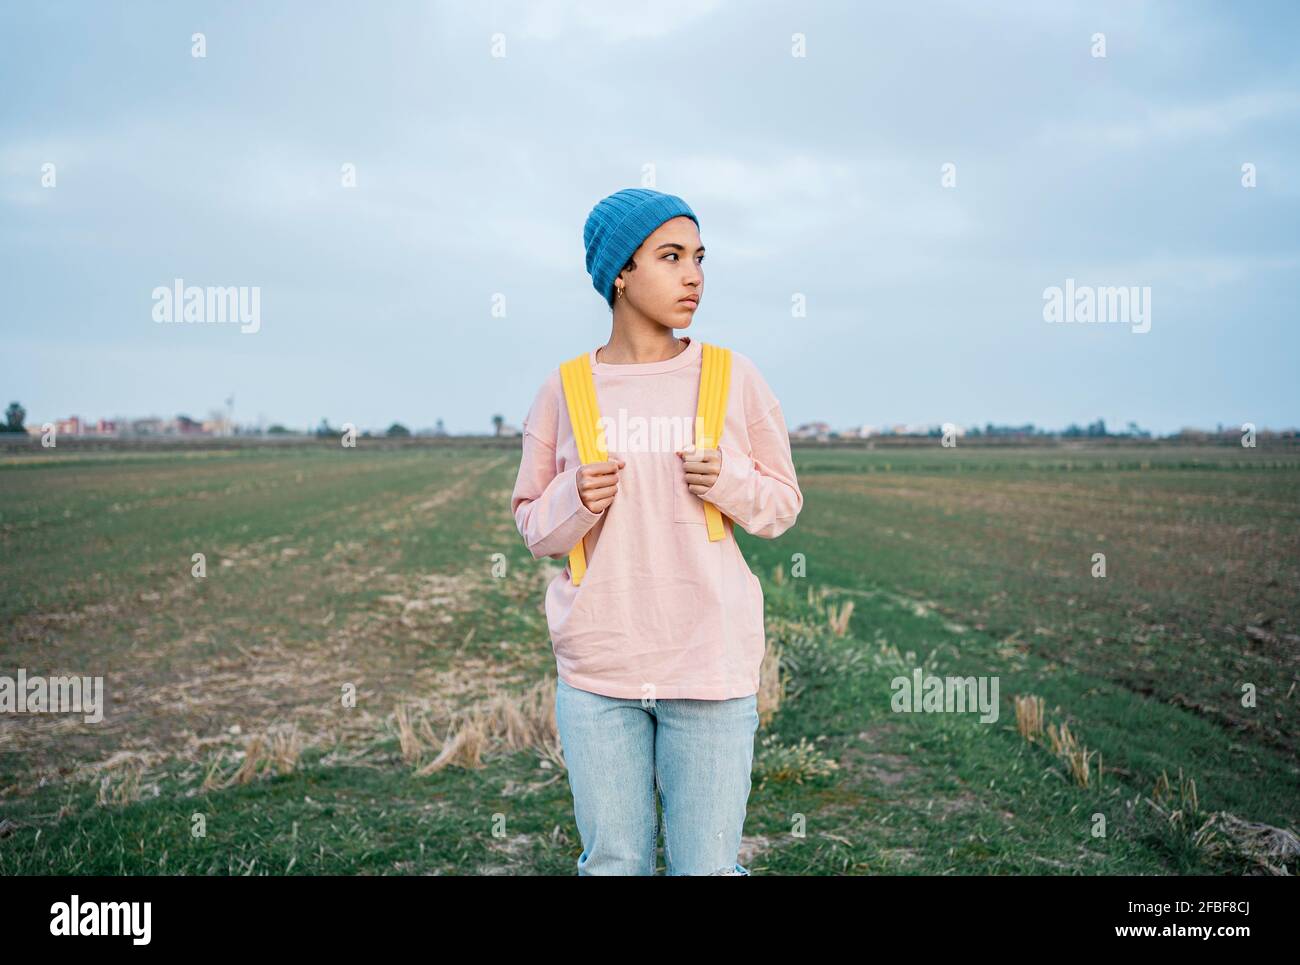 Woman with backpack looking away while standing on green field Stock Photo